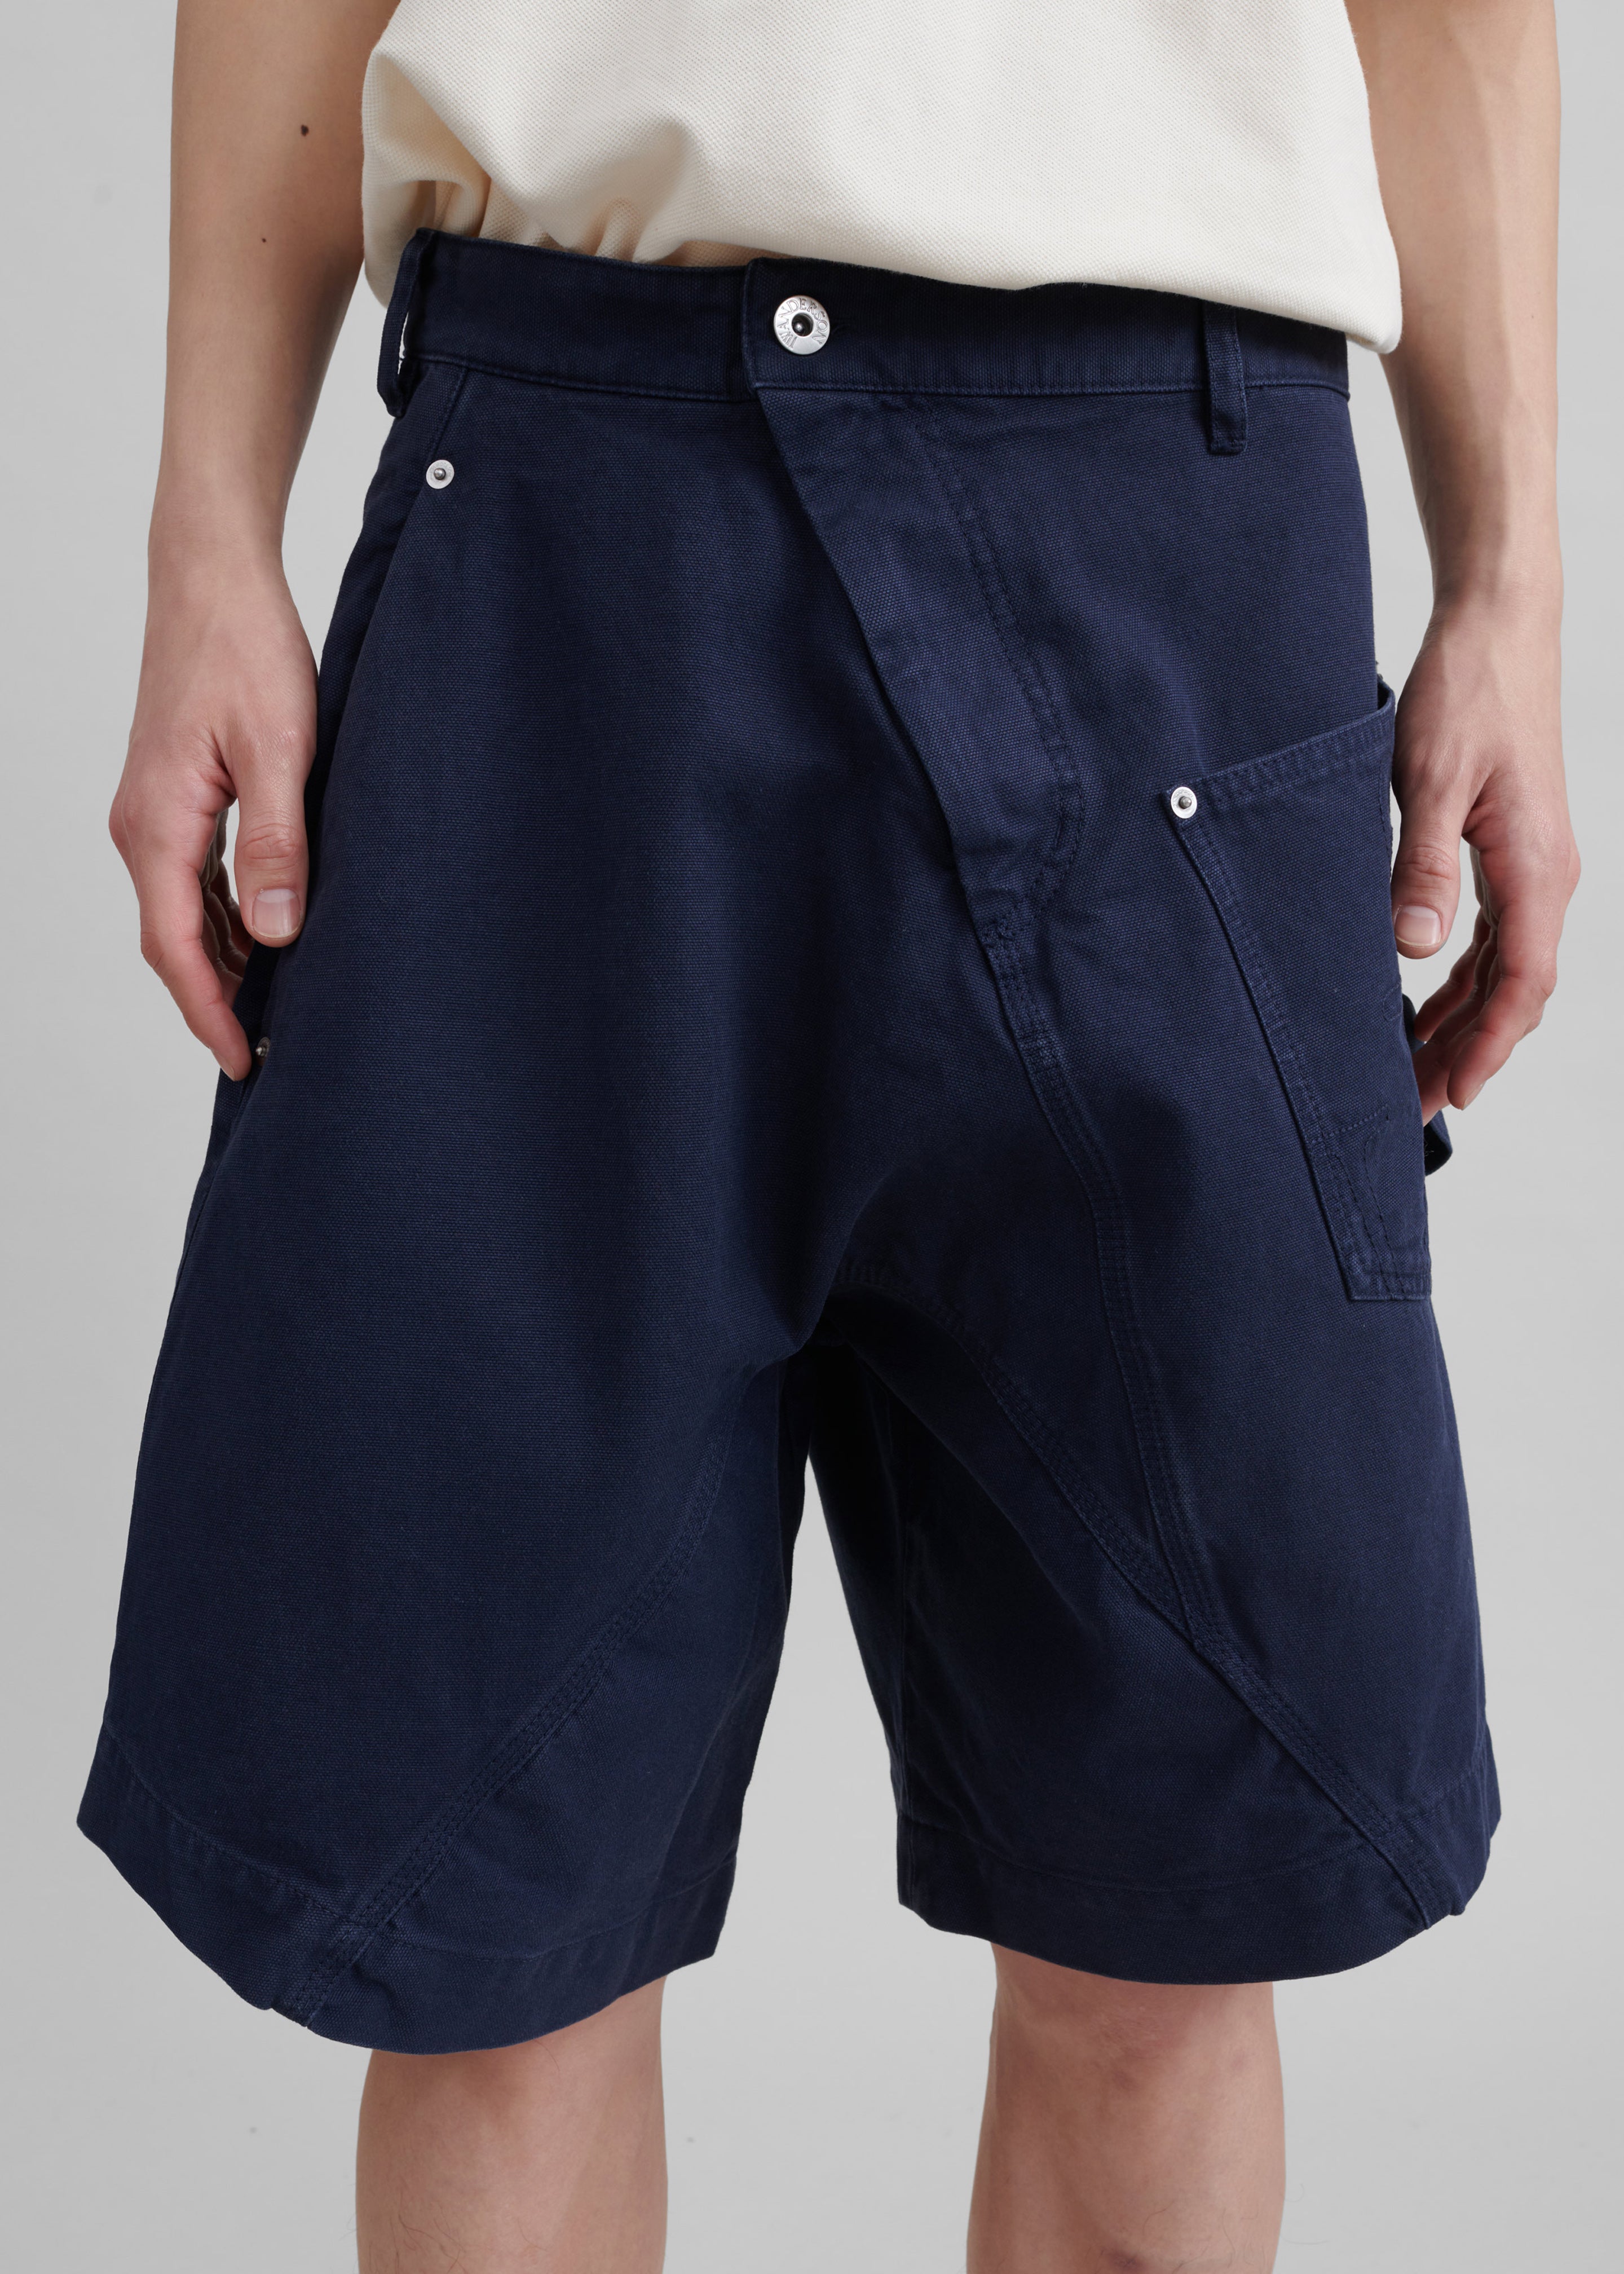 JW Anderson Twisted Shorts - Navy - 3